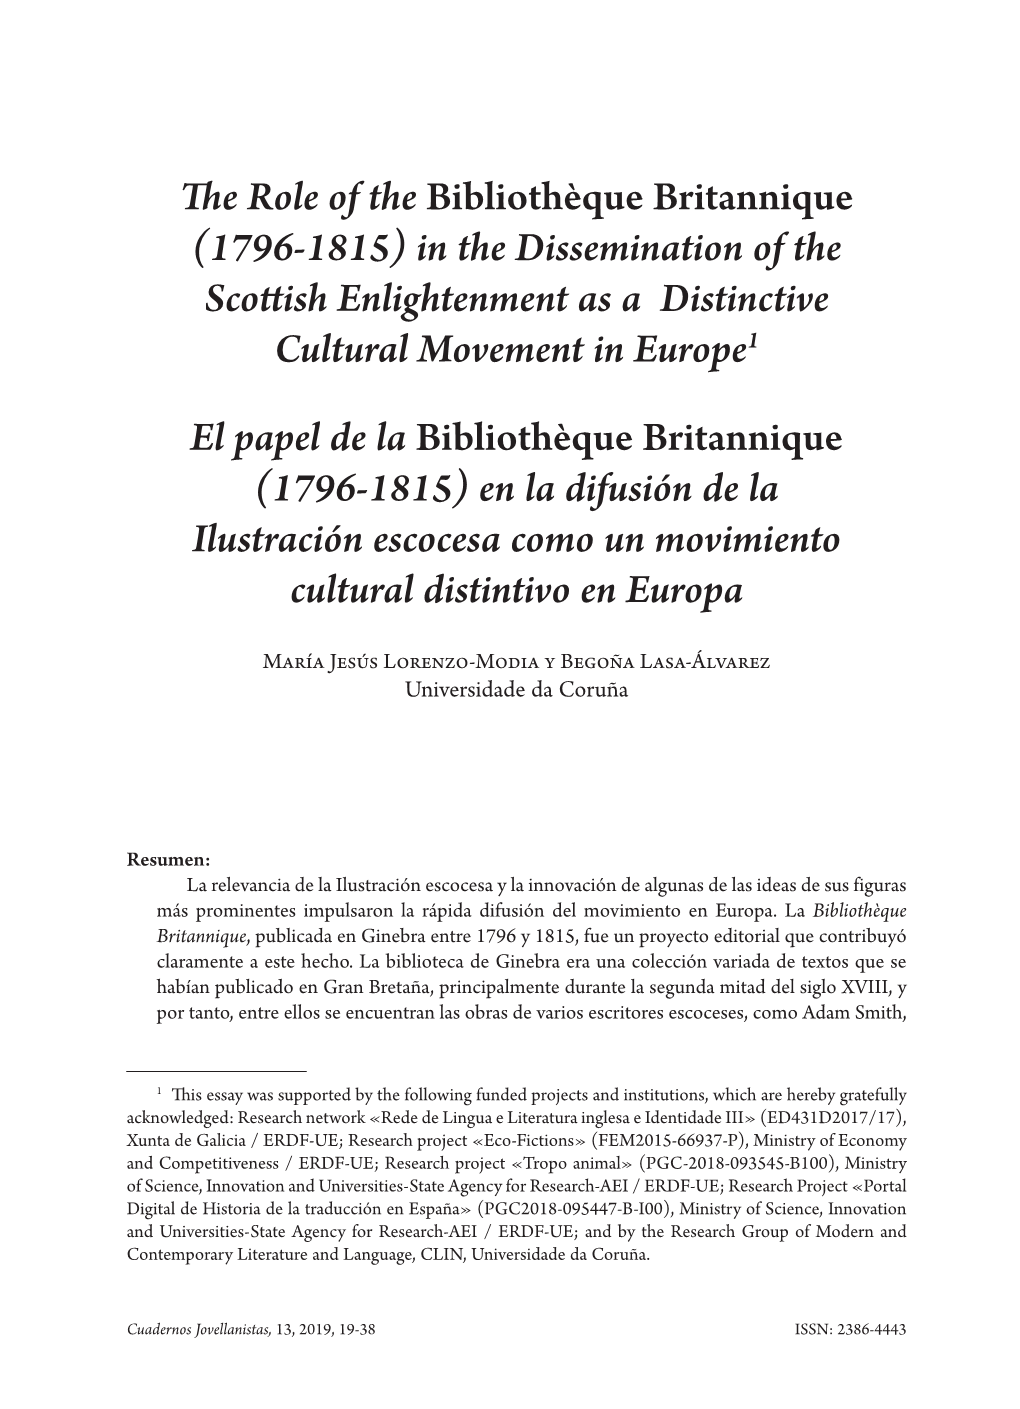 The Role of the Bibliothèque Britannique (1796-1815) in the Dissemination of the Scottish Enlightenment As a Distinctive Cultural Movement in Europe 21